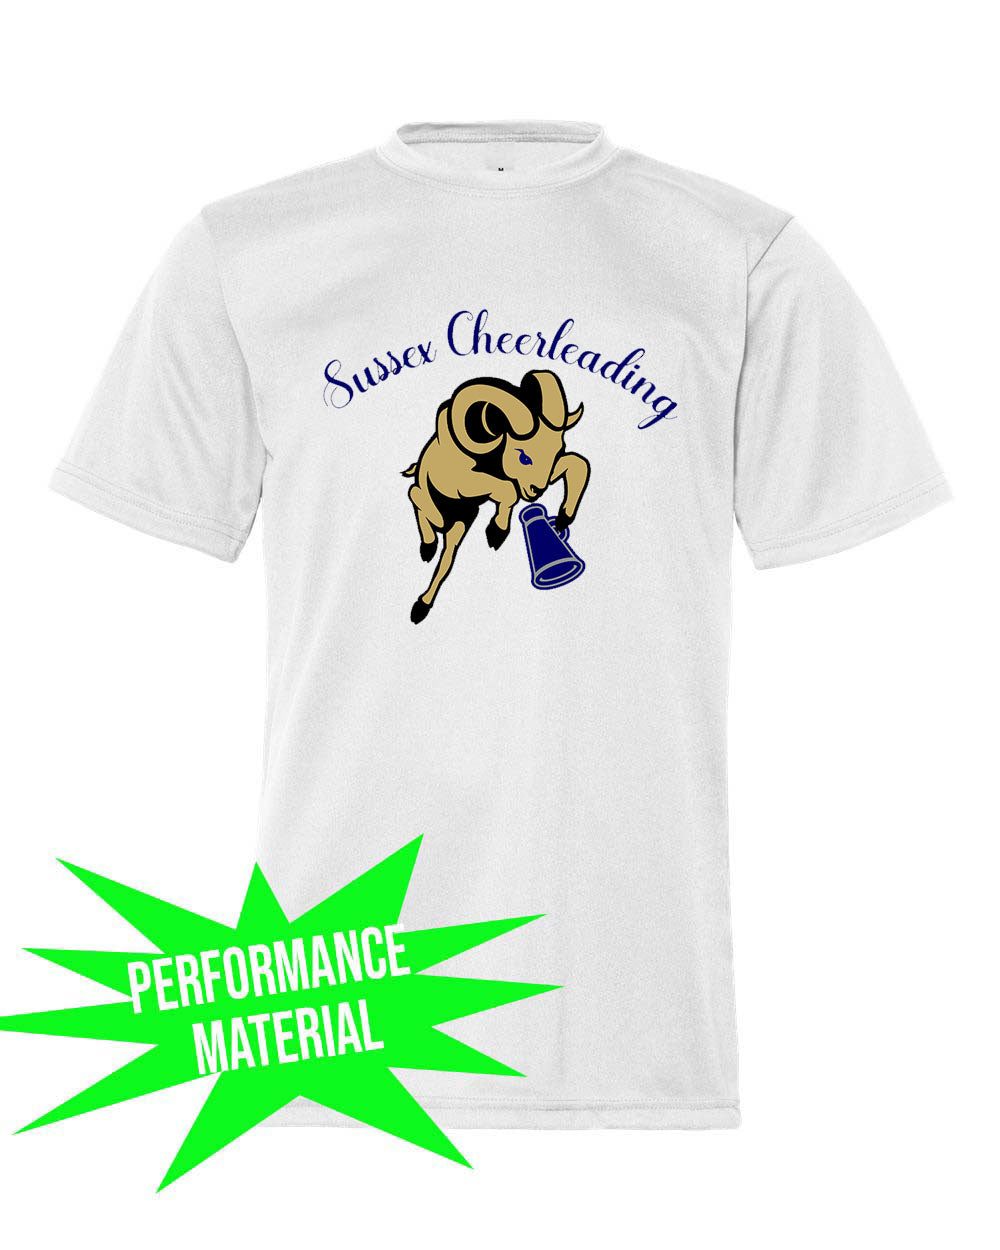 Sussex Middle Cheer Performance Material T-Shirt Design 3